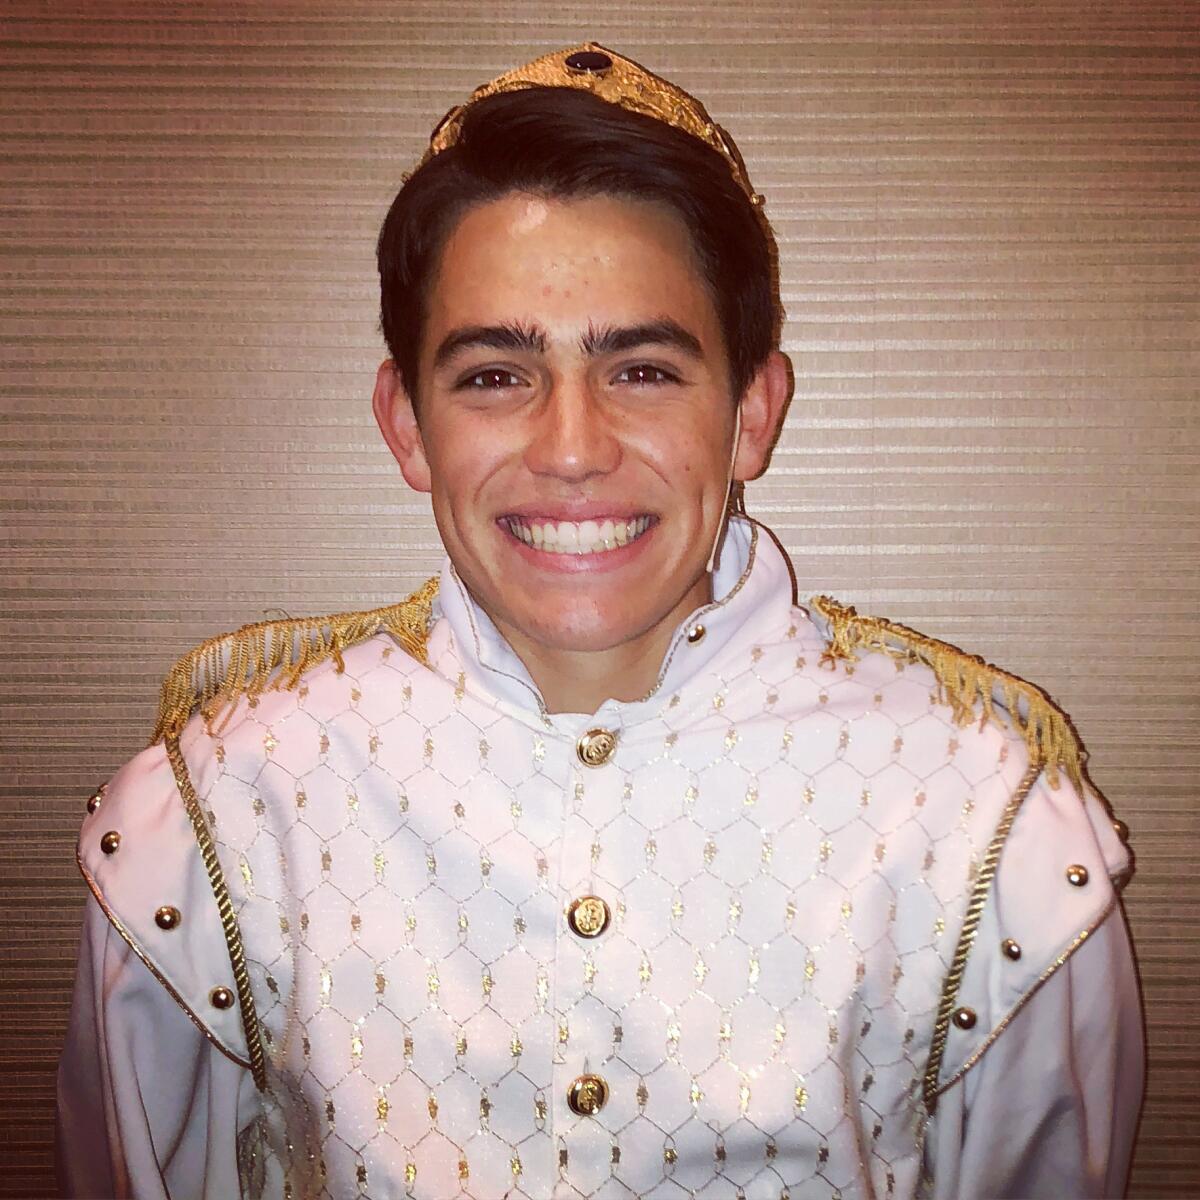 Anthony Barajas was in the honors chamber singers and was King of the Annual Madrigal Feast.